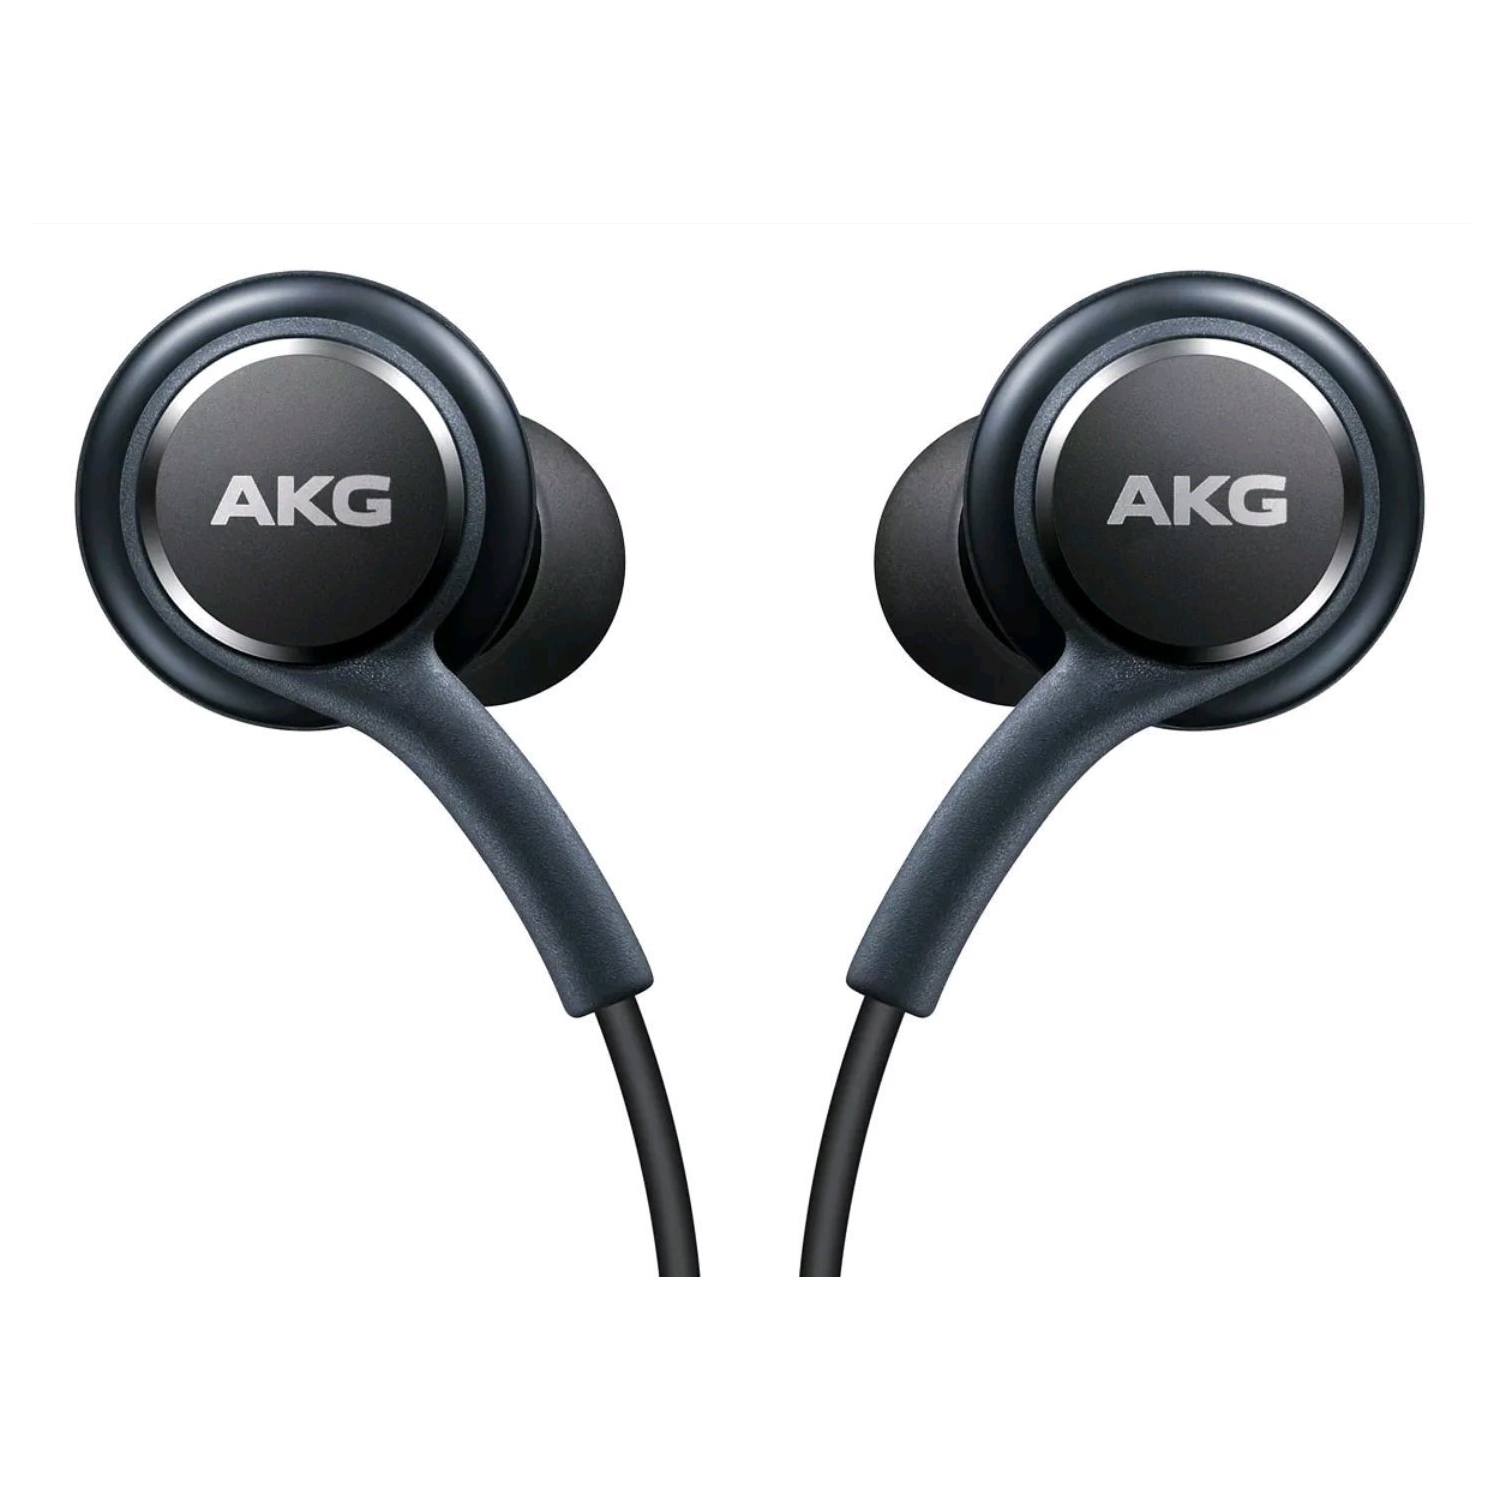 OEM Stereo Samsung Headphones /Microphone for Samsung Galaxy S8 S9 S8 Plus S9 Plus Note 8 - Designed by AKG - Black 3.5 mm